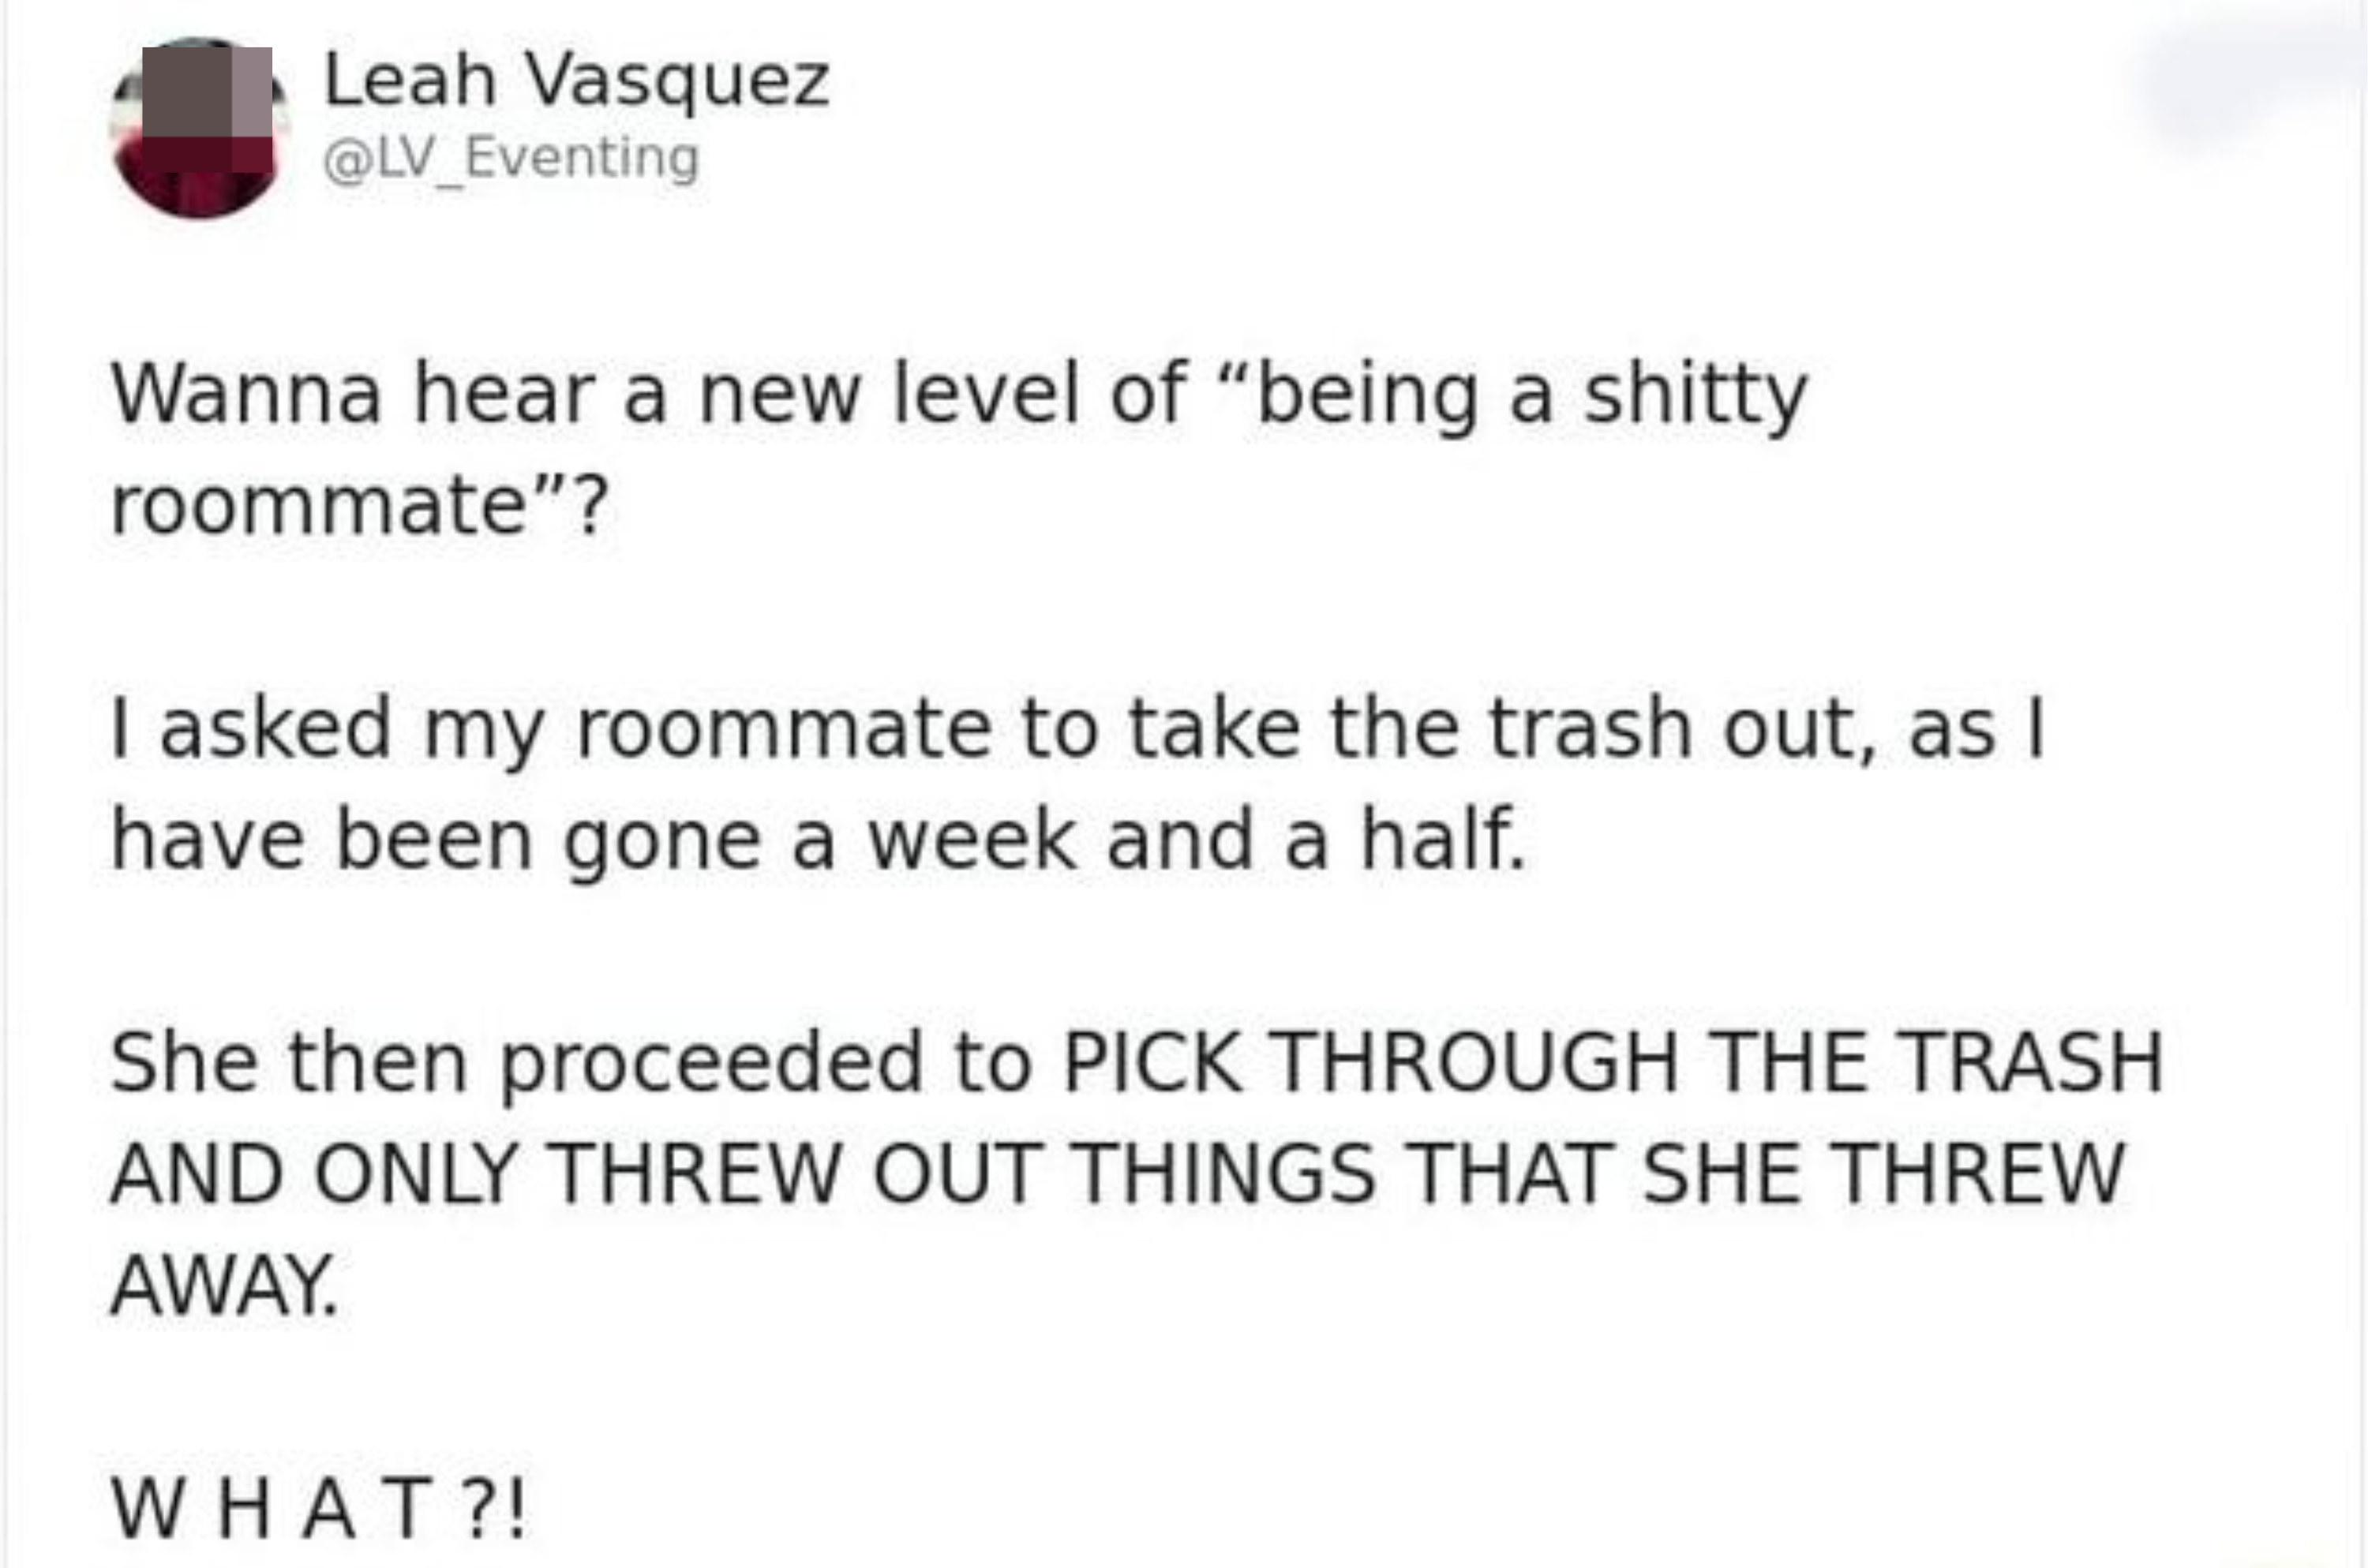 A person whose roommate only throws out half the trash, their half